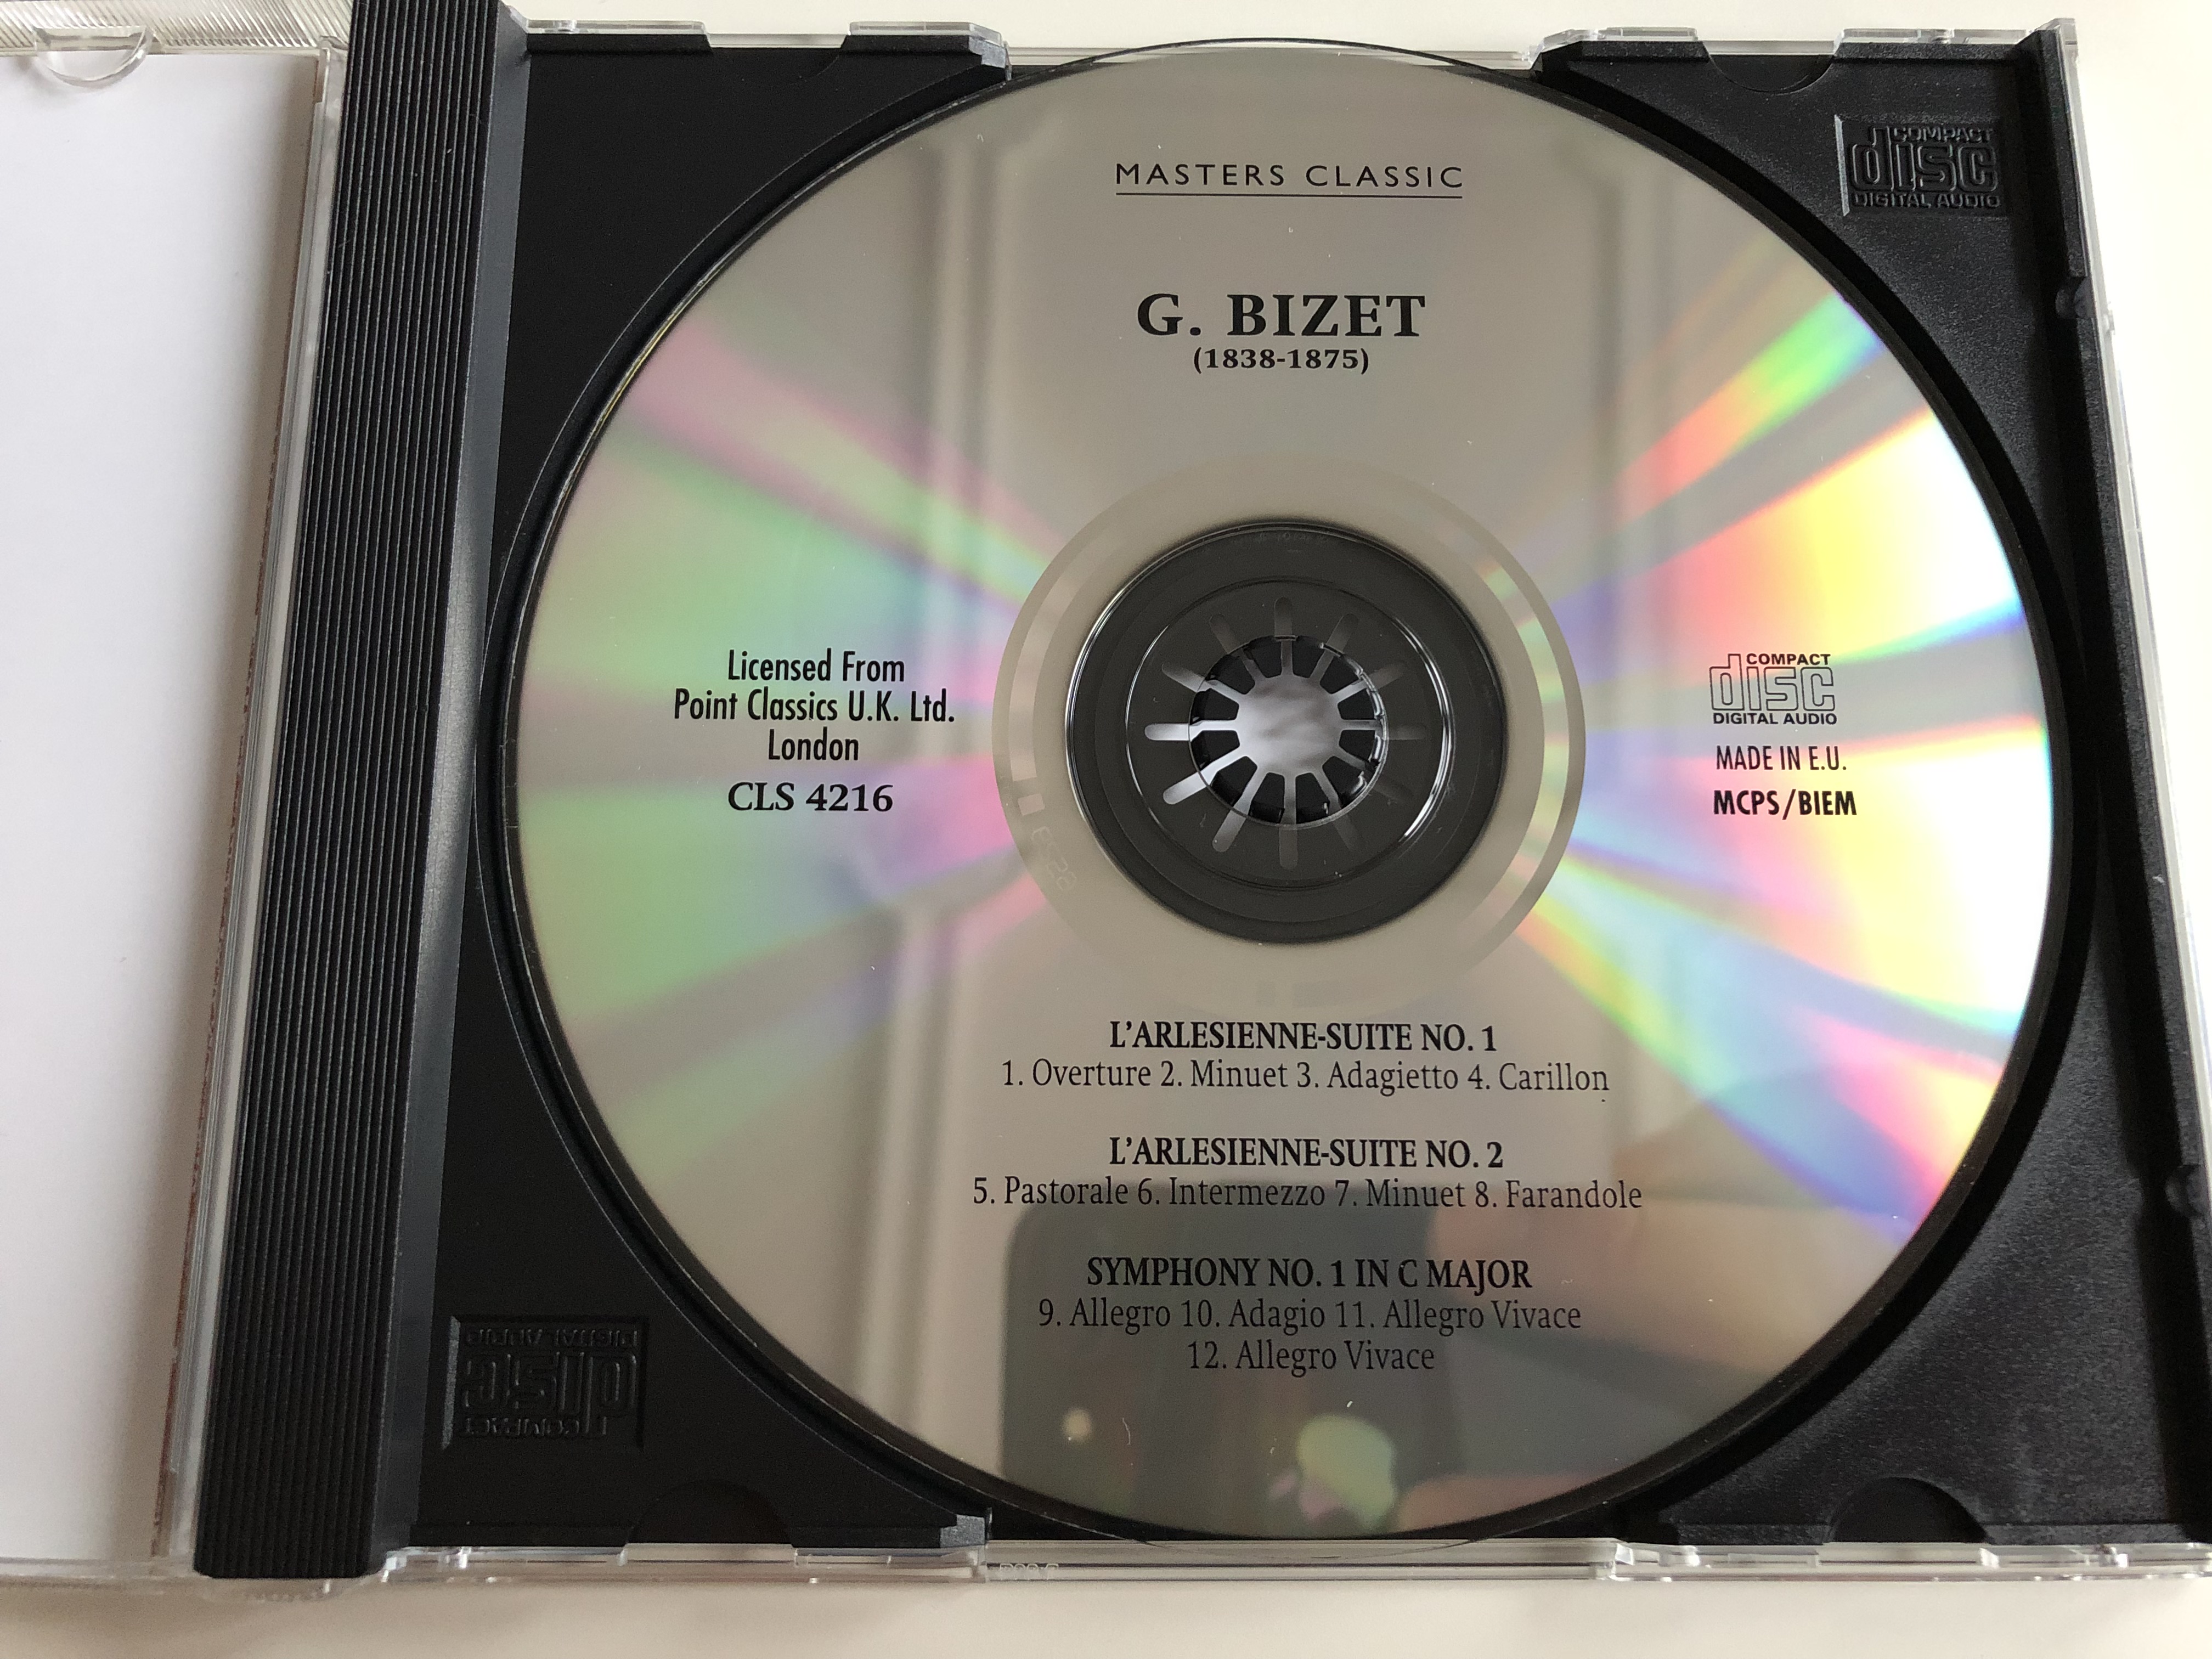 georges-bizet-audio-cd-l-arl-sienne-suites-1-2-symphony-no.-1-symphony-nr.-1-london-festival-orchestra-conducted-by-alfred-scholz-masters-classic-cls-4216-2-.jpg